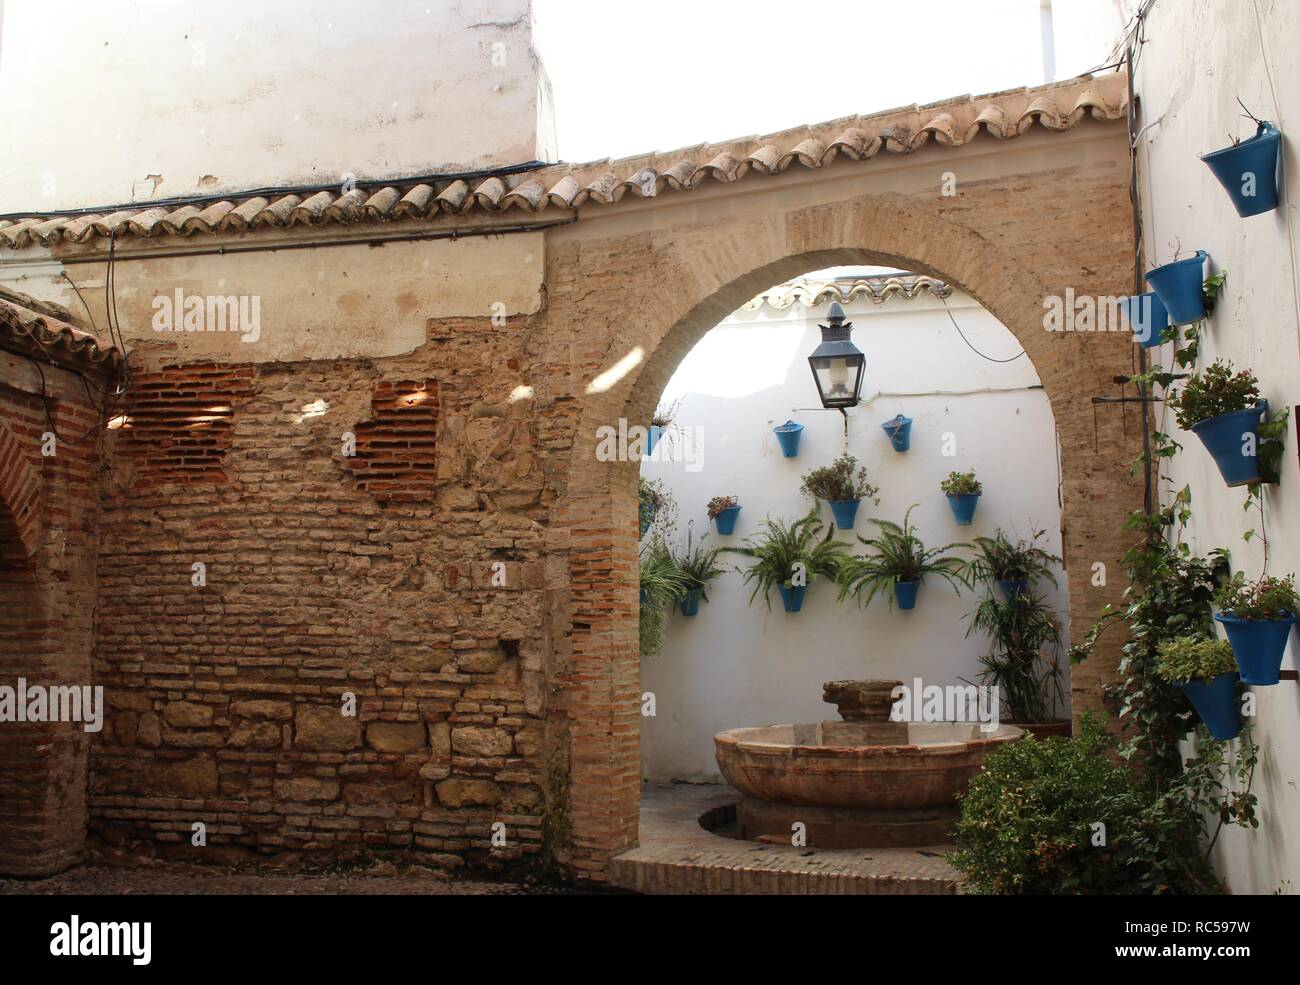 An Old Fashioned Spanish Garden In An Old Building In The Old Town